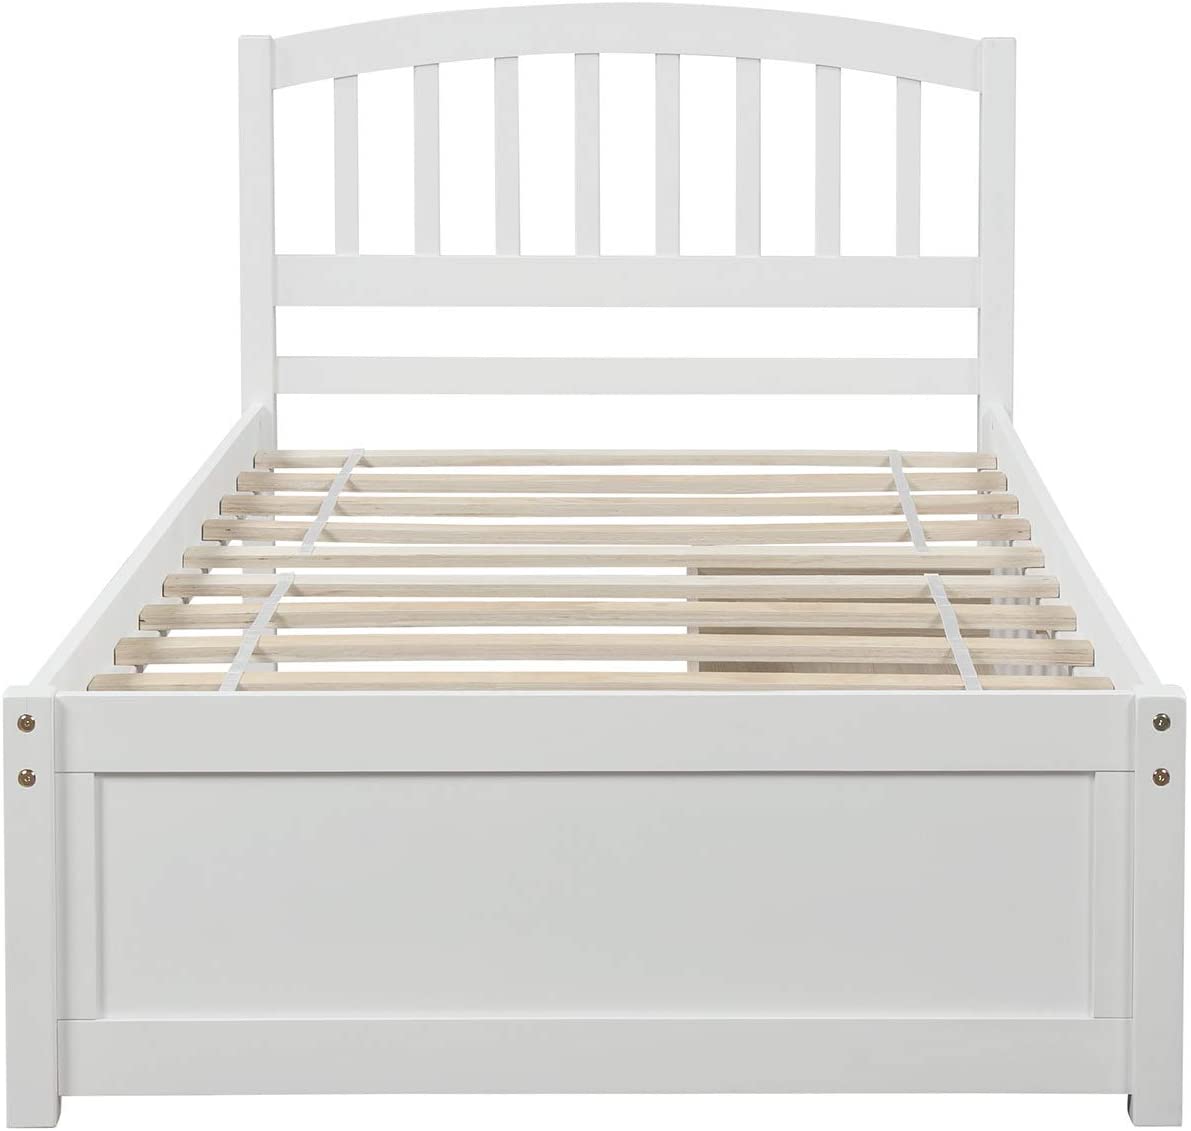 Twin Size Platform Bed with Two Storage Drawers, Wood Bed Frame with Headboard, White 79.5x41.8x37.4inch - image 3 of 7